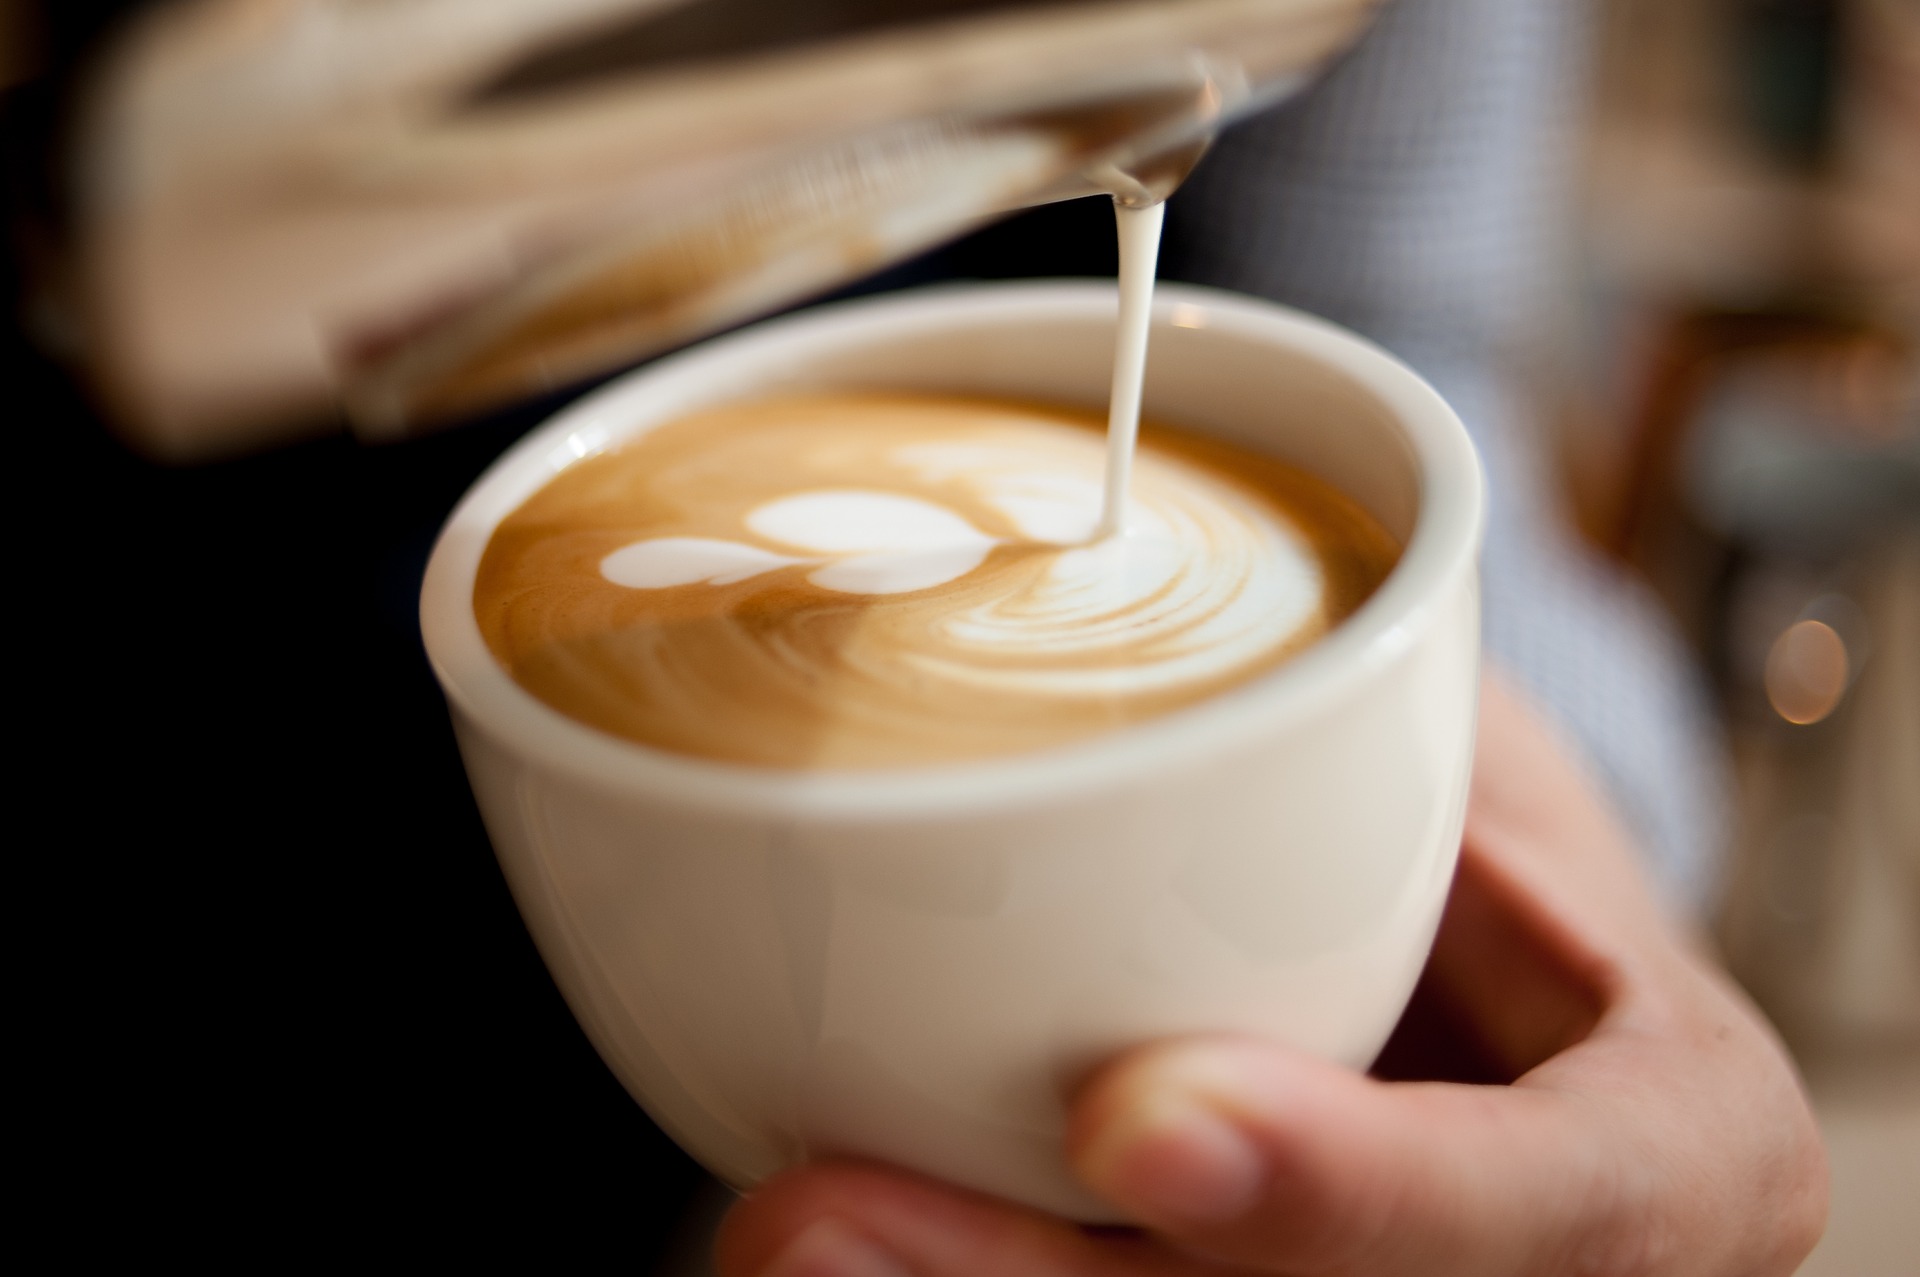 Are you paying too much for your coffee? Check here